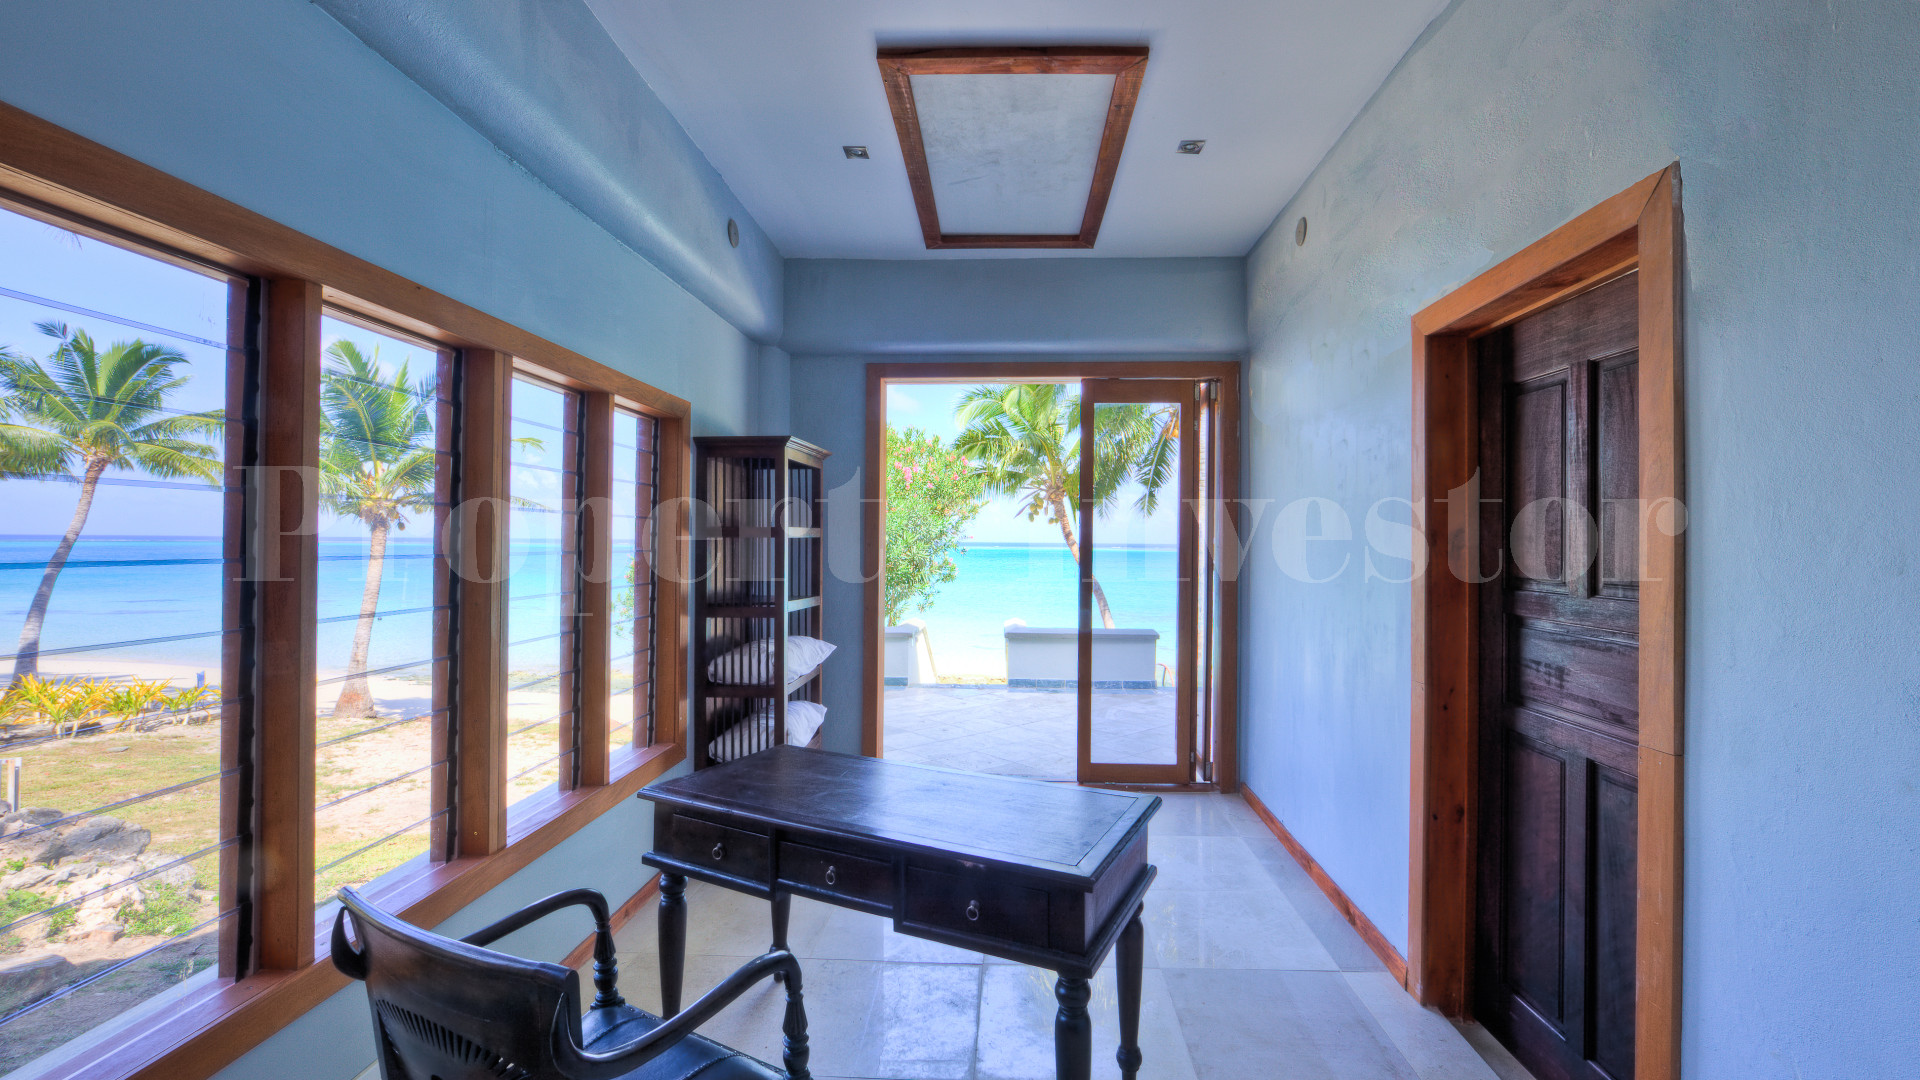 91 Hectare Private Island Resort or Residence with Runway & Golf Course for Sale in Fiji